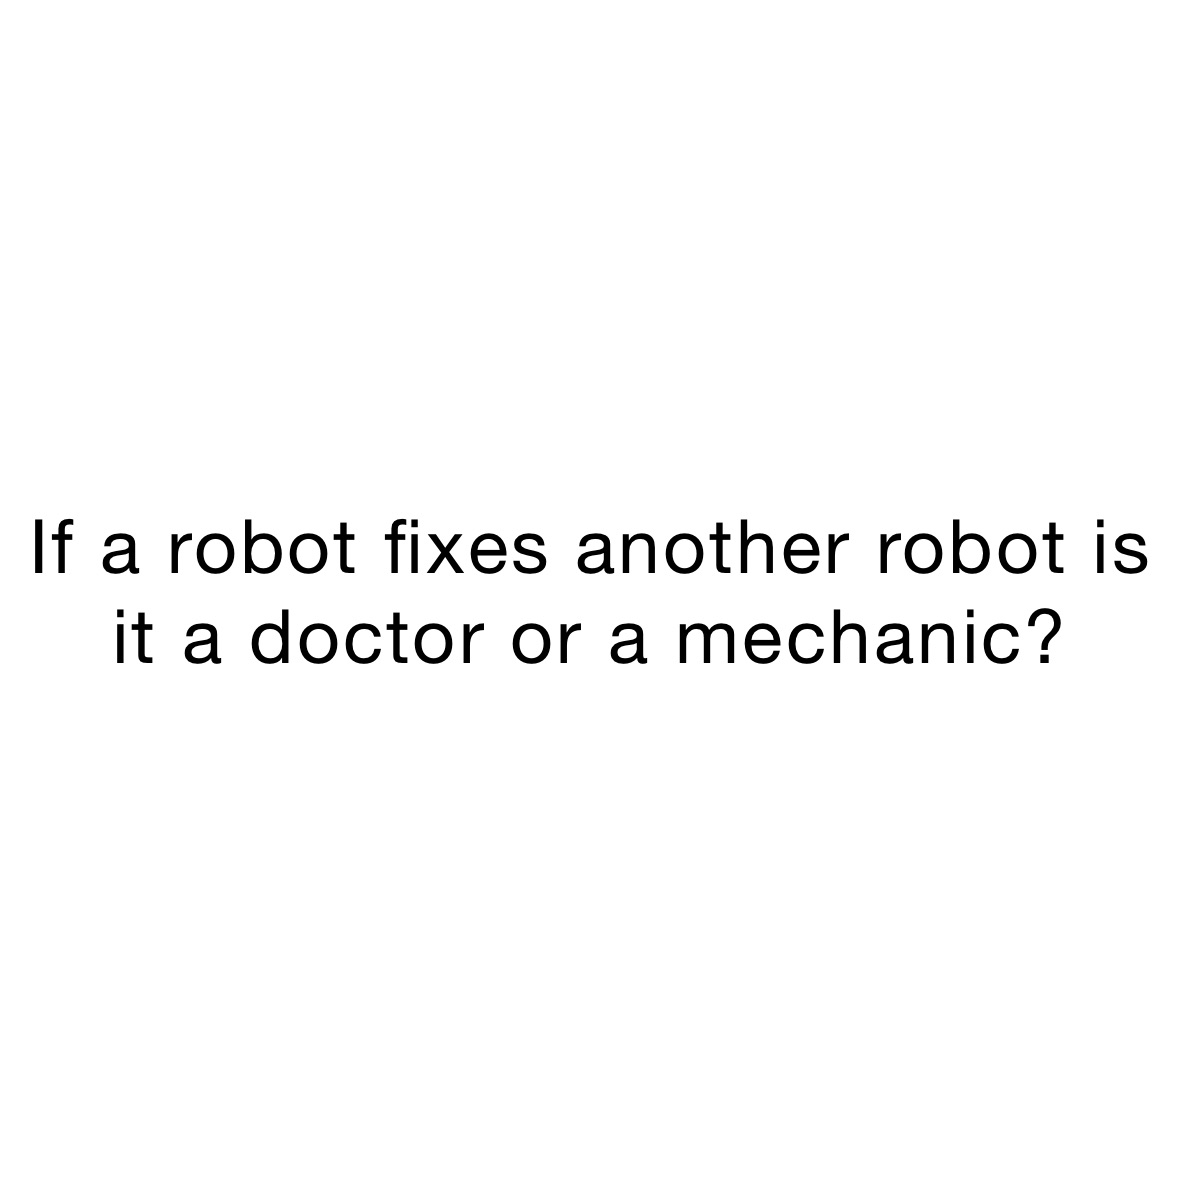 If a robot fixes another robot is it a doctor or a mechanic?